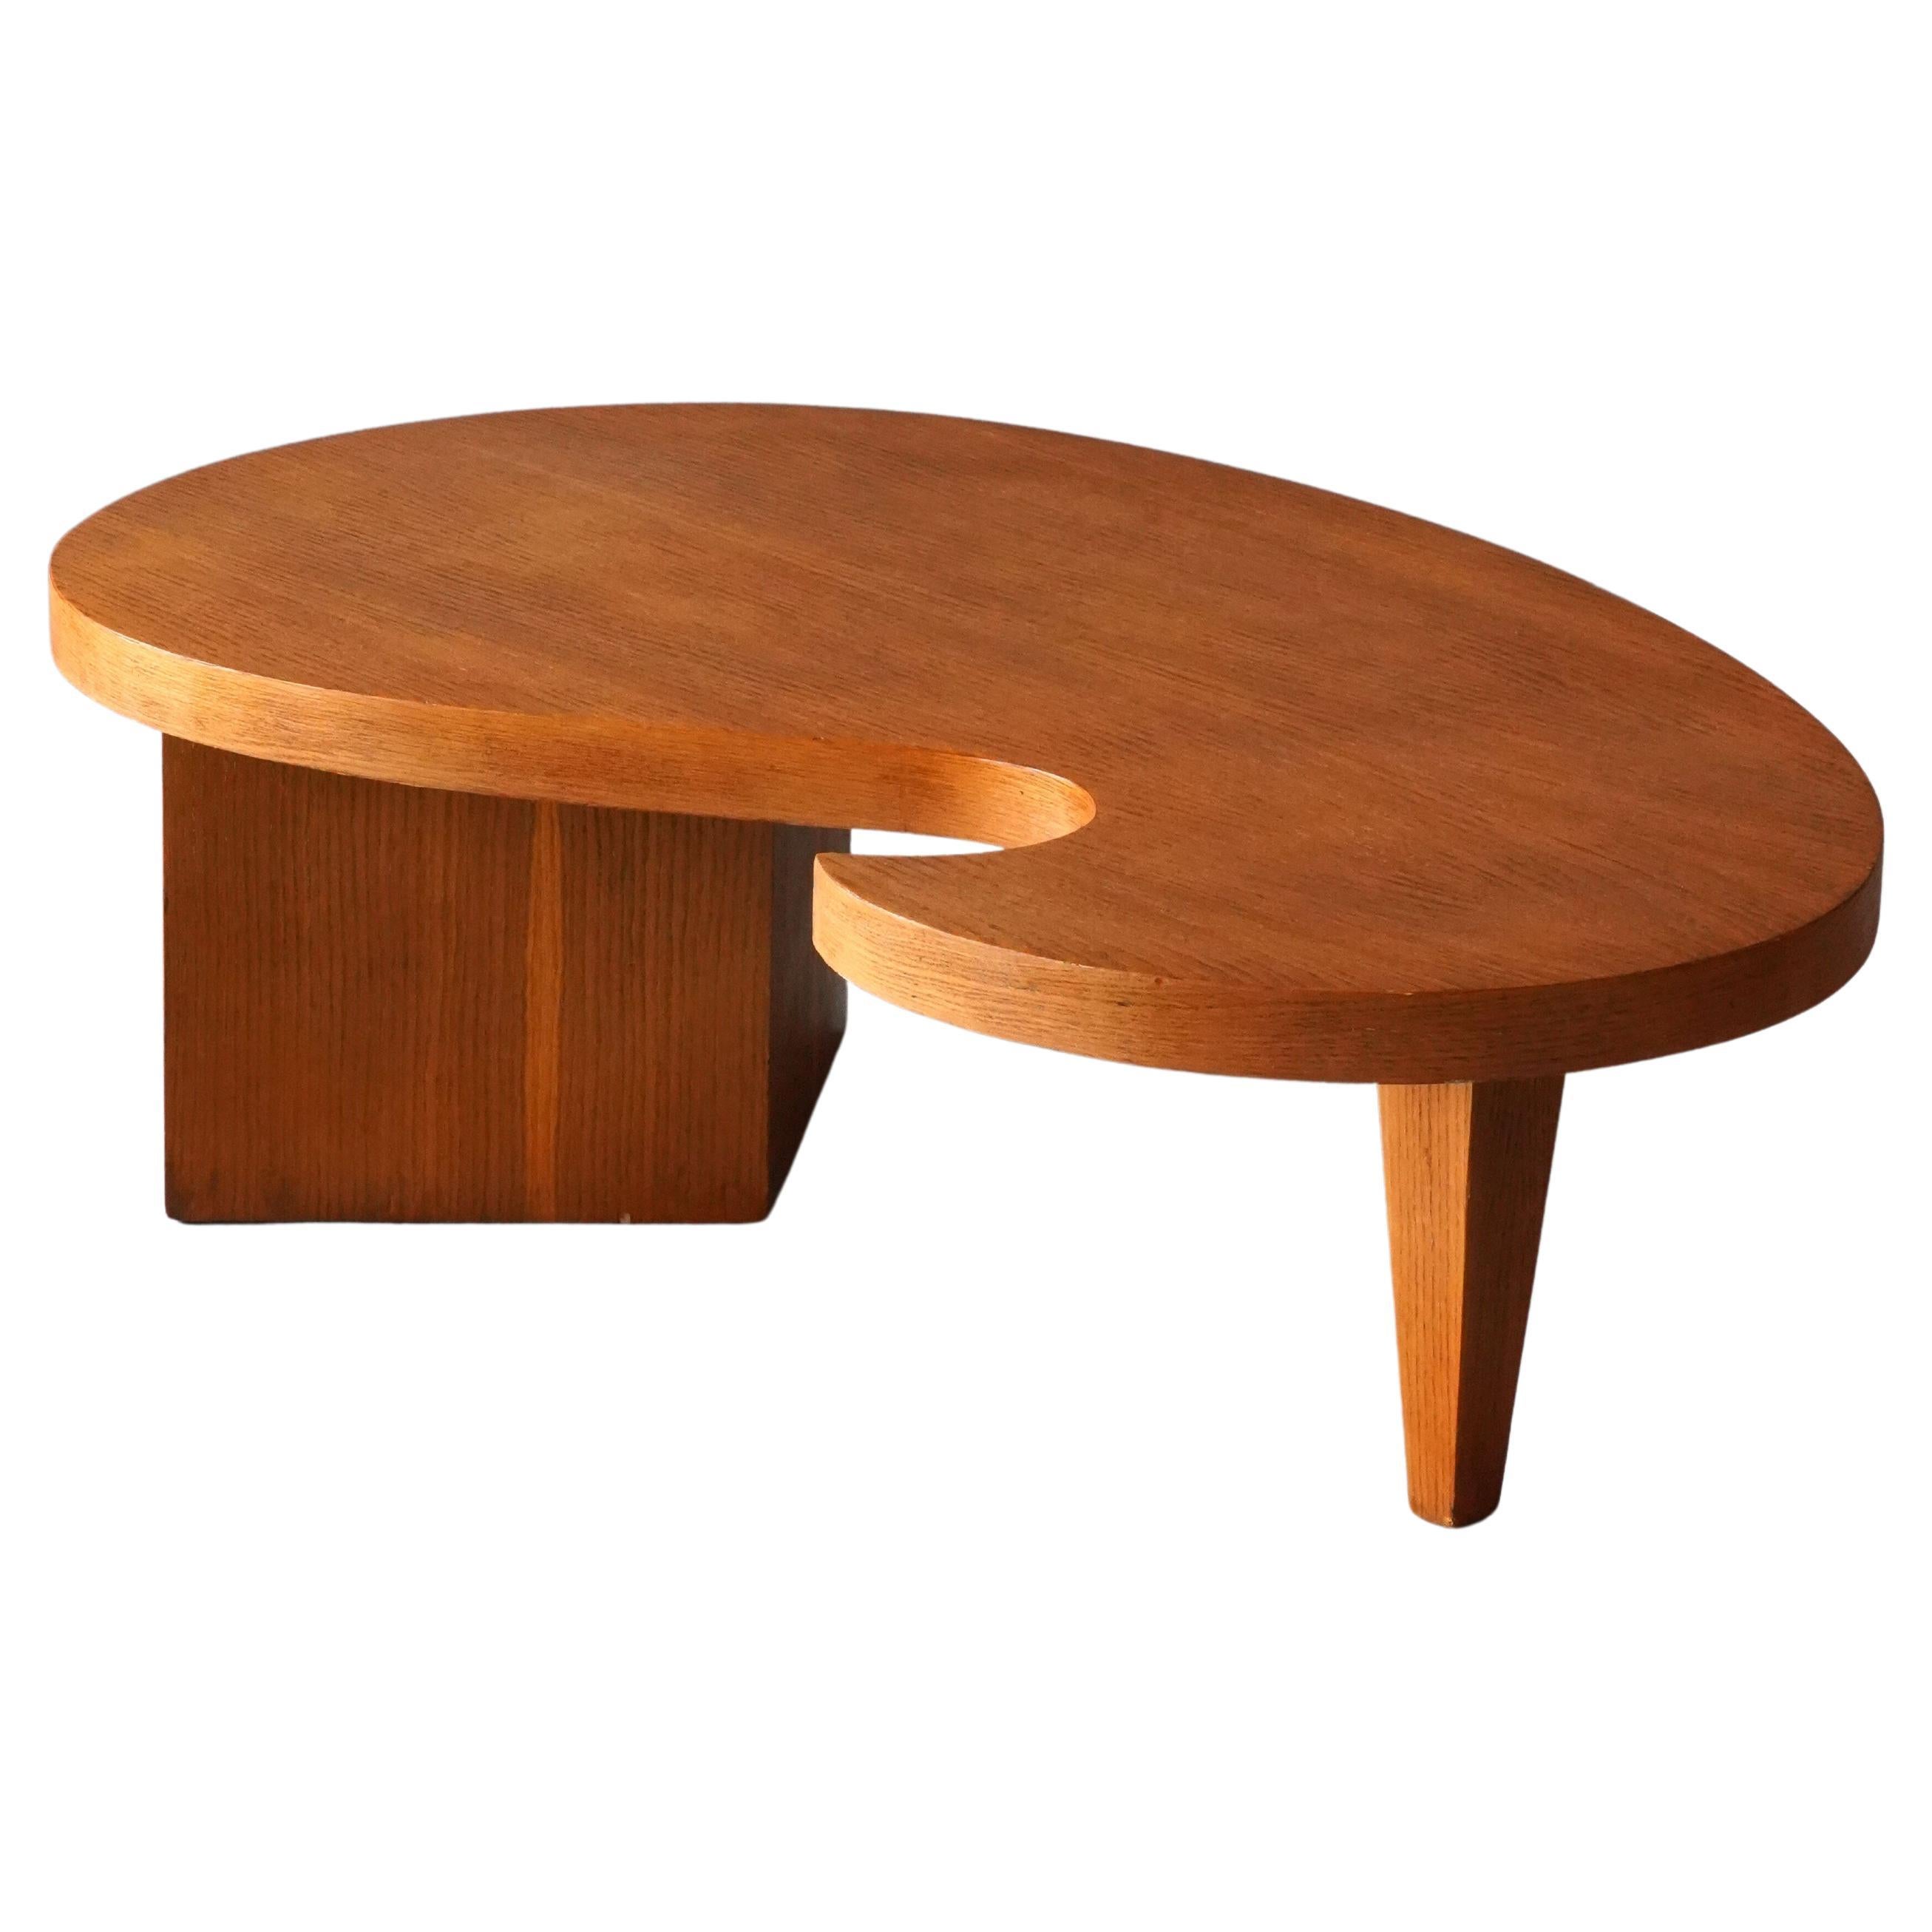 American, Freeform Coffee or Cocktail Table, Oak, United States, 1950s